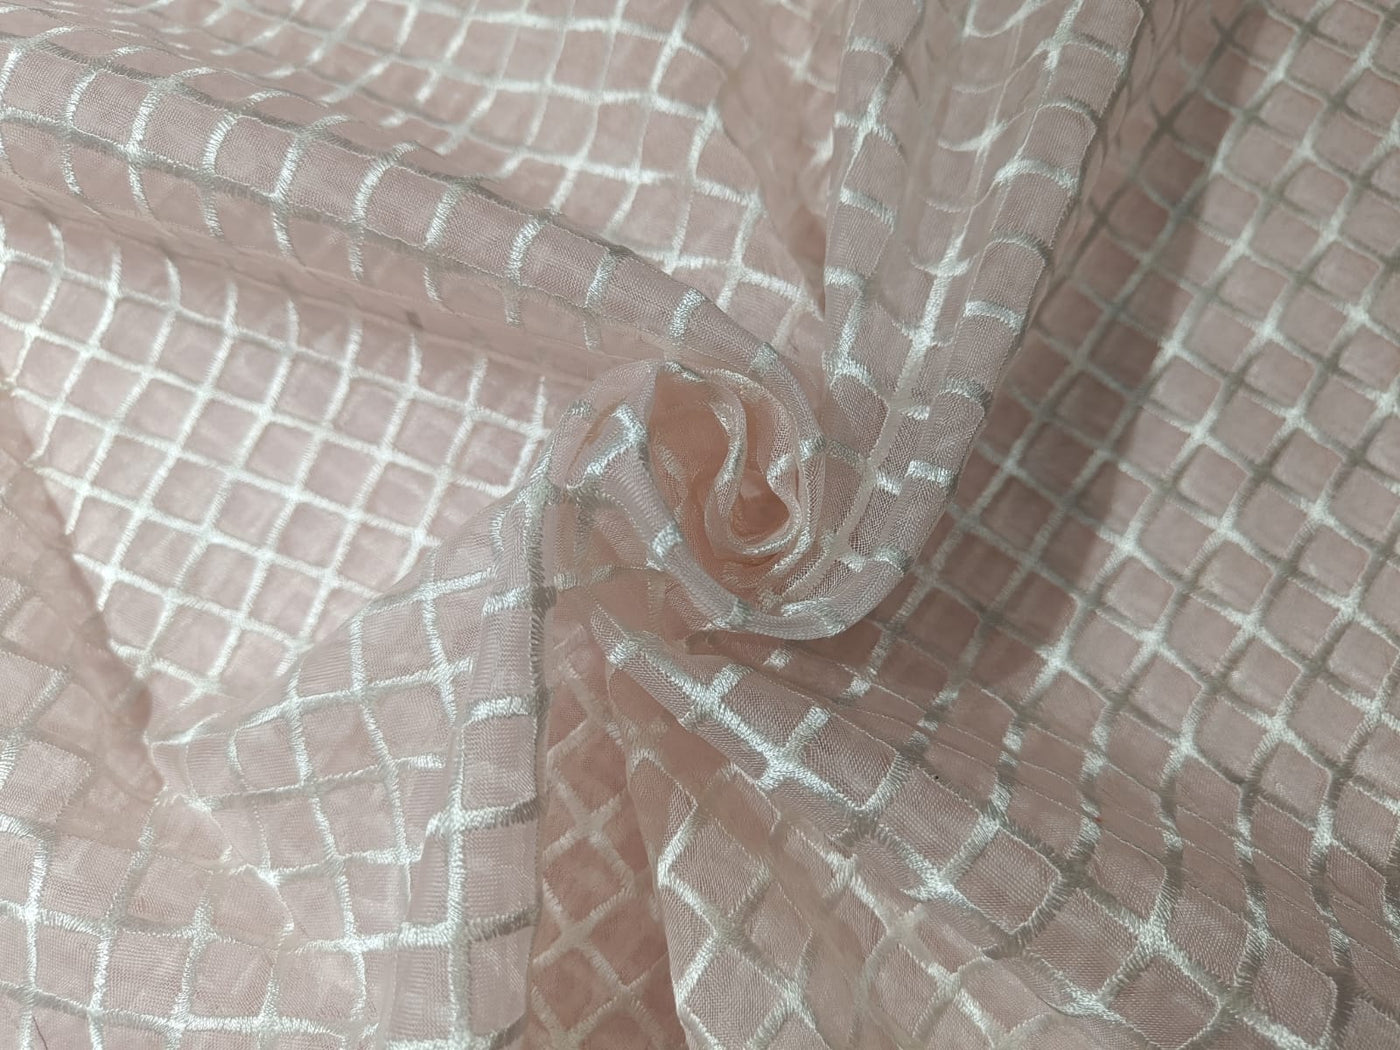 100 % Silk Organza Embroidery Plaid Semi Sheer Fabric 44" wide available in three colors [12306/12482/83]